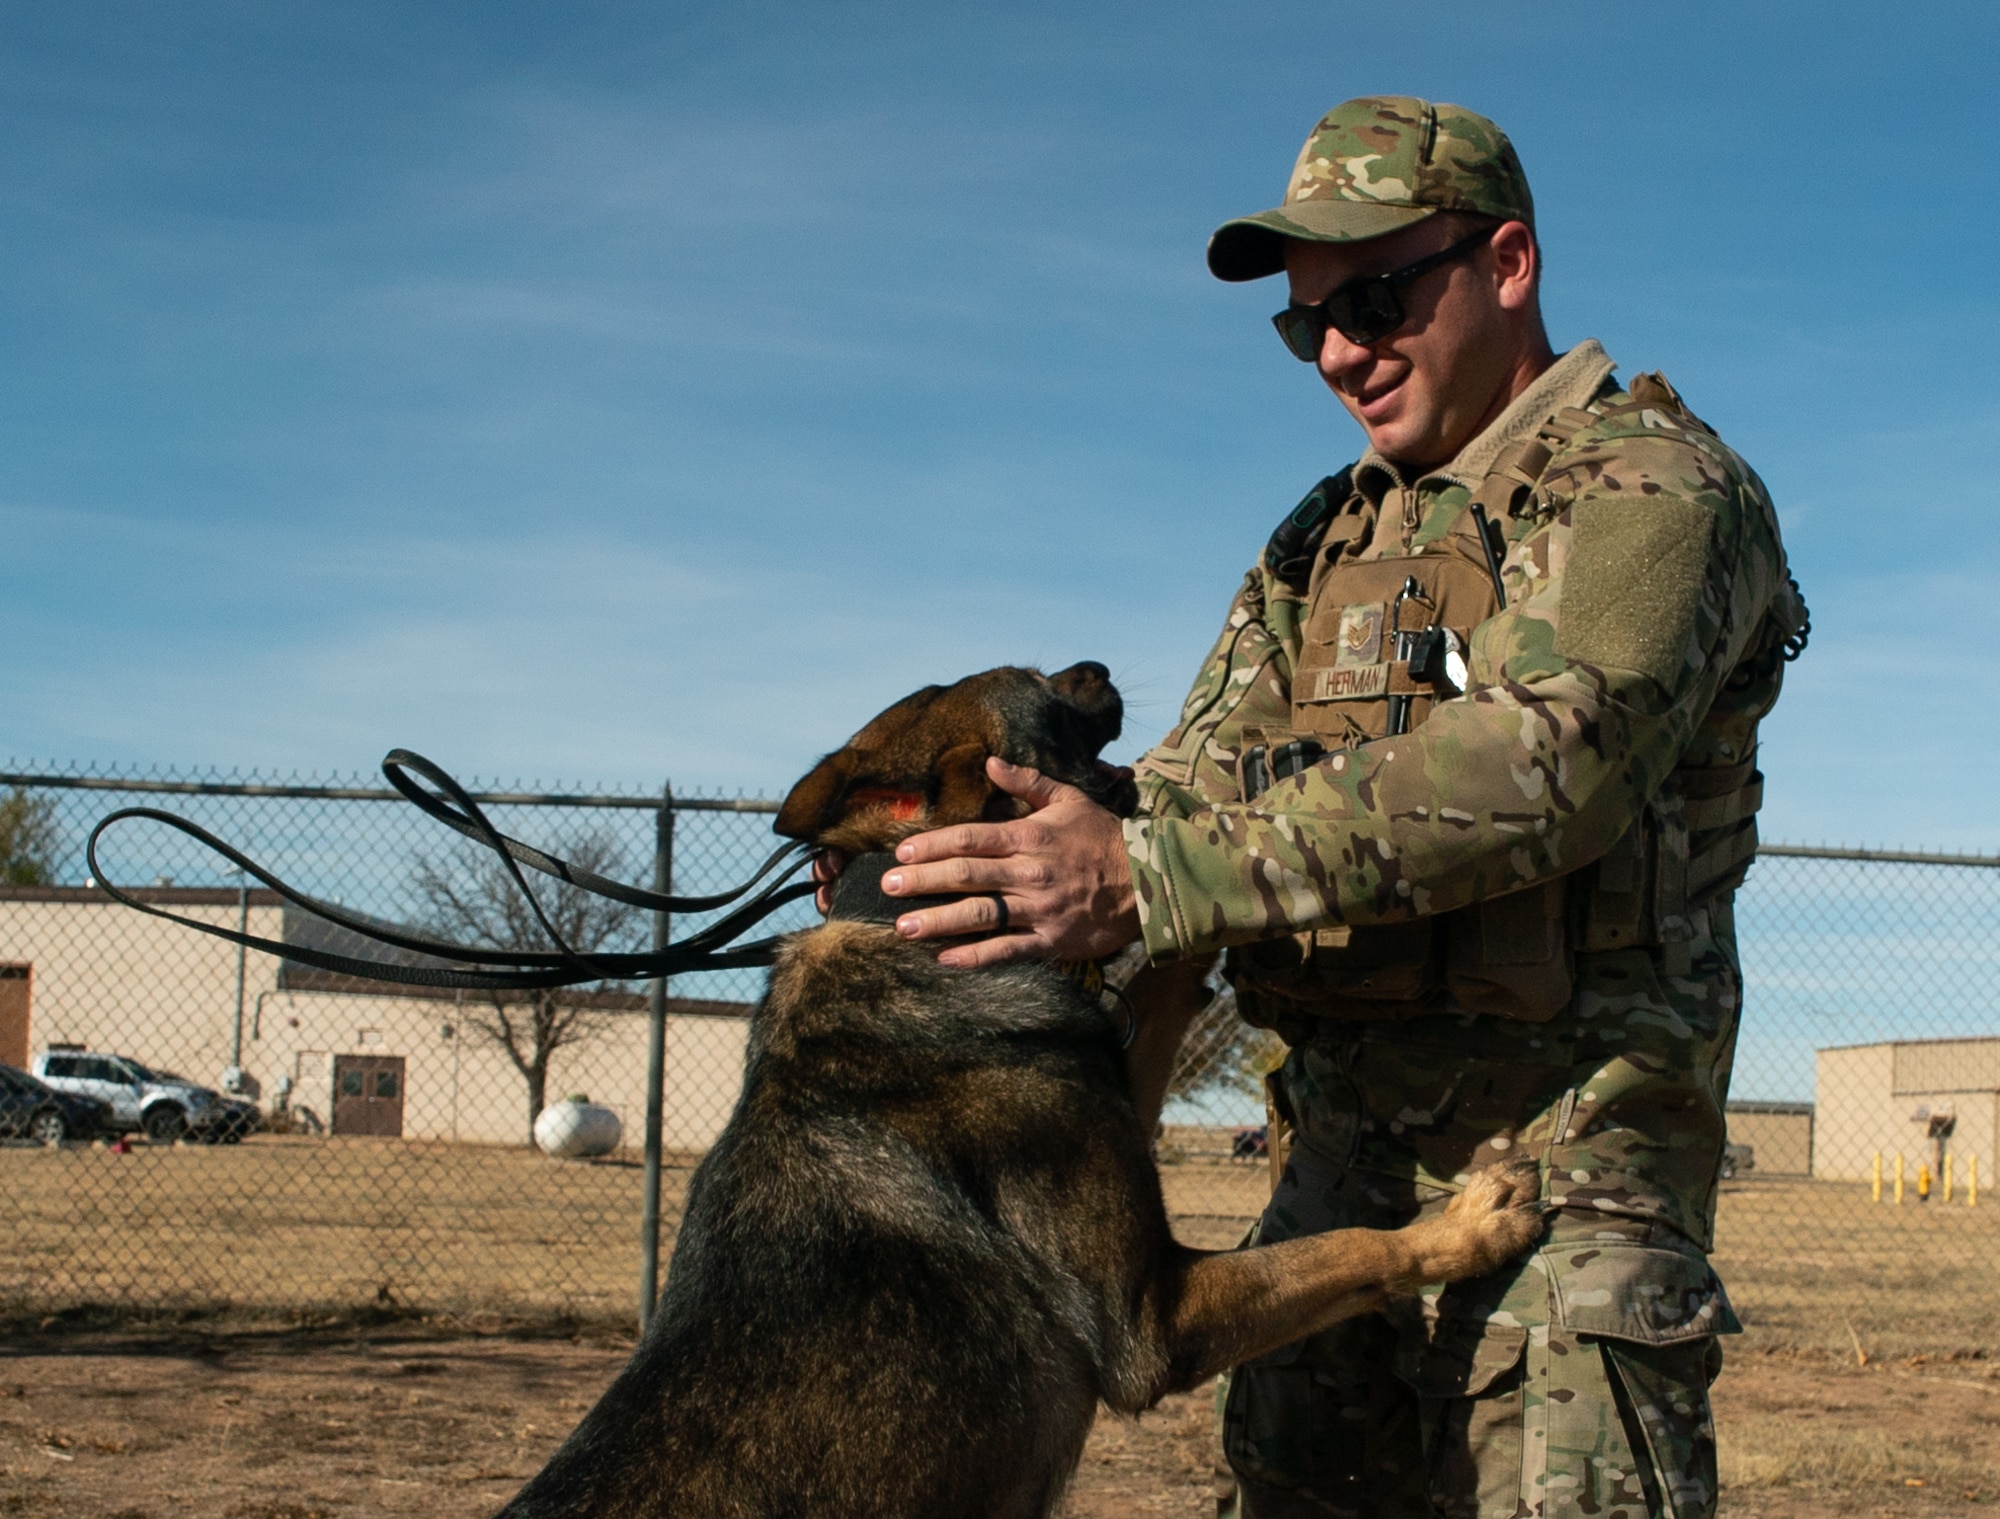 Military Working Dog Fulda W378, 27th Special Operations Security Forces Squadron K-9, jumps on his handler and adopter U.S. Air Force Staff Sgt. Michael Herman, 27 SOSFS K-9 handler, at the K-9 training grounds on Cannon AFB, N.M., Nov. 15, 2021. The bond between MWDs and their handlers is crucial to the success of their mission, as the understanding between both individuals keeps them alert and engaged while on the job. (U.S. Air Force photo by Senior Airman Christopher Storer)